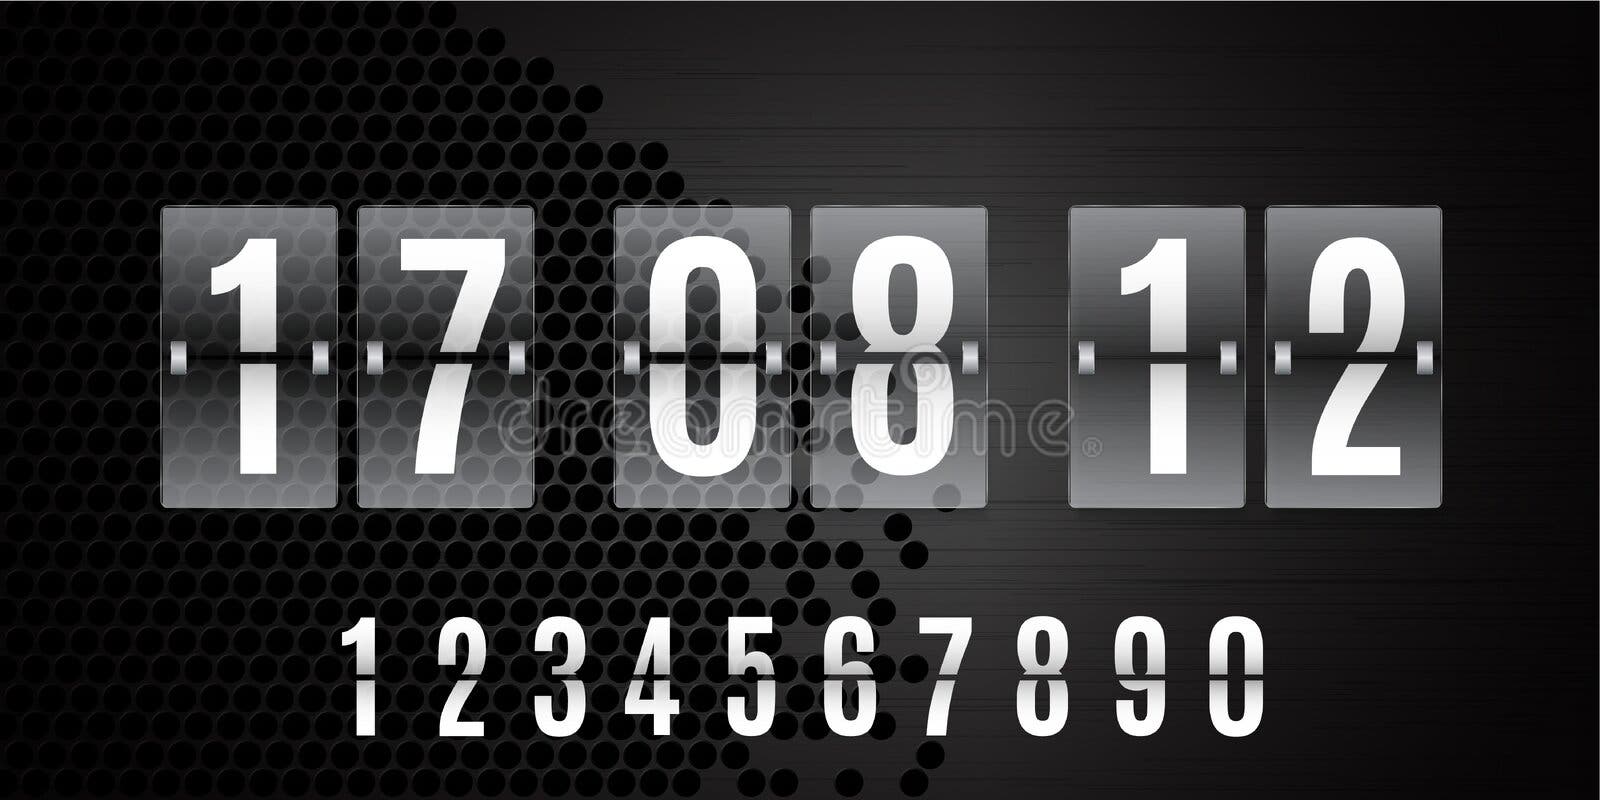 Countdown Timer With White Digital Numbers On Black Background